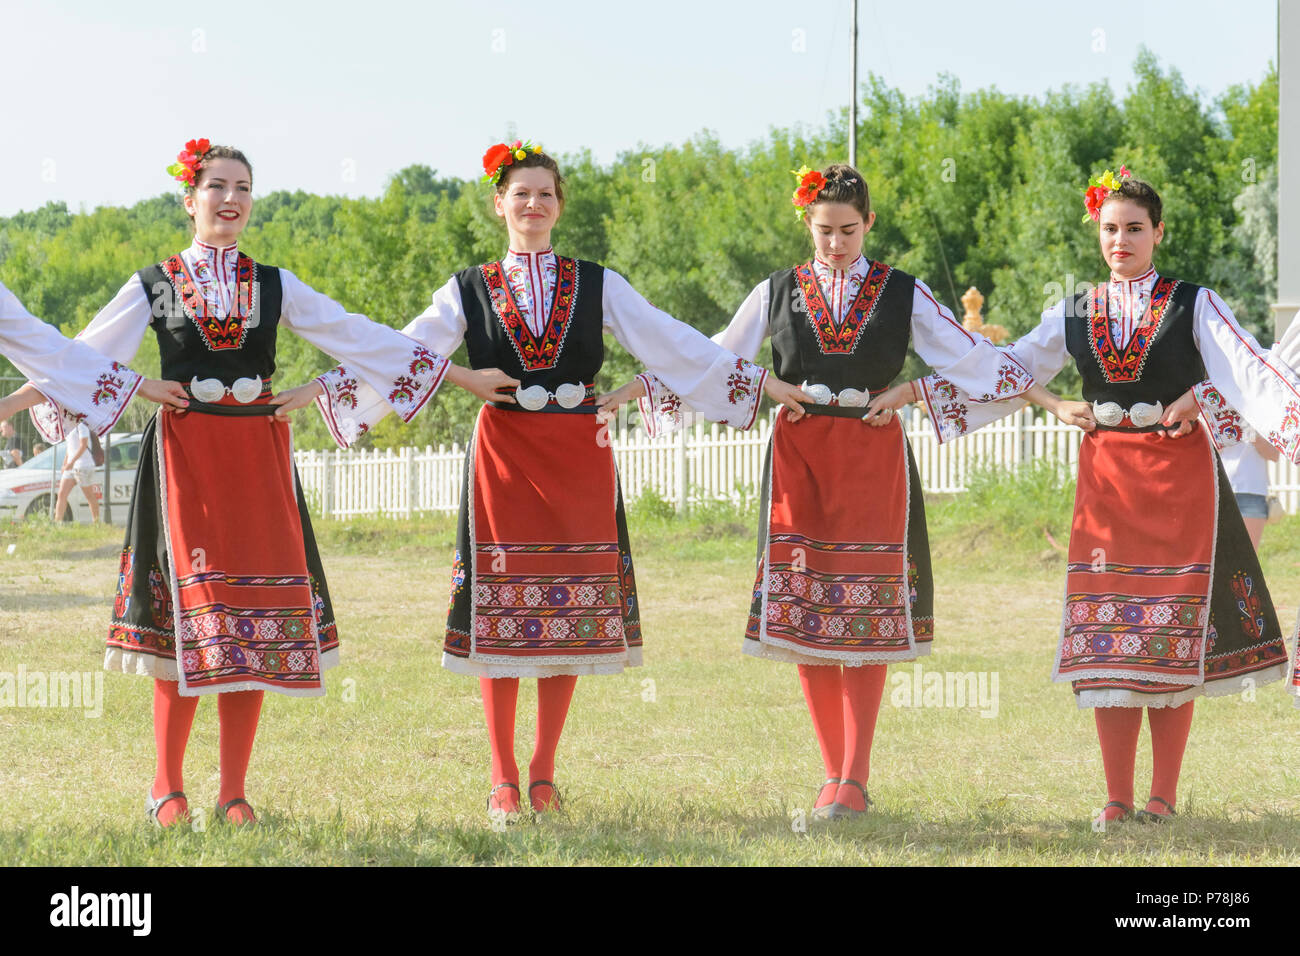 Kranevo, Bulgaria - June 10, 2018: People in authentic folklore costume in a meadow dancing Bulgarian traditional dance named Horo Stock Photo